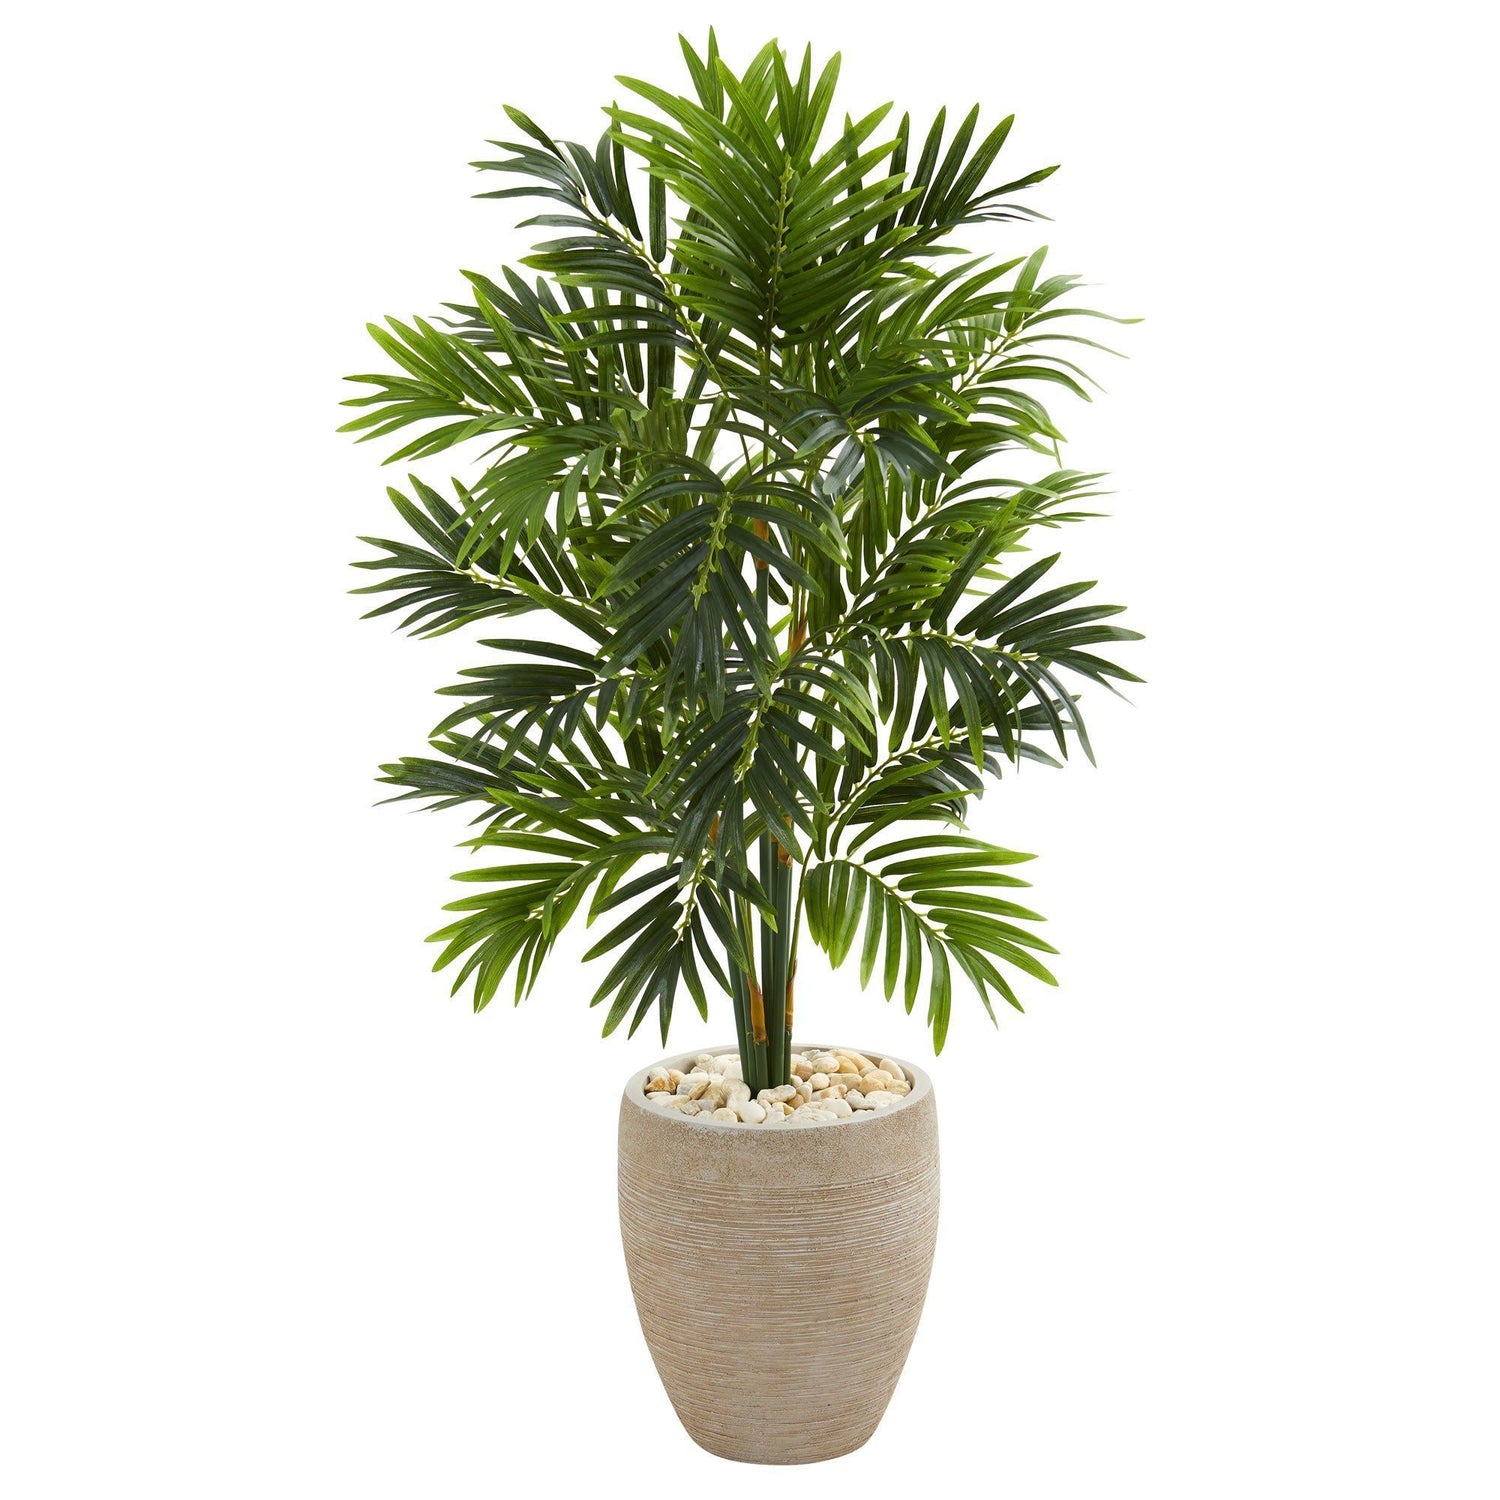 4’ Areca Artificial Palm Tree in Sand Colored Planter